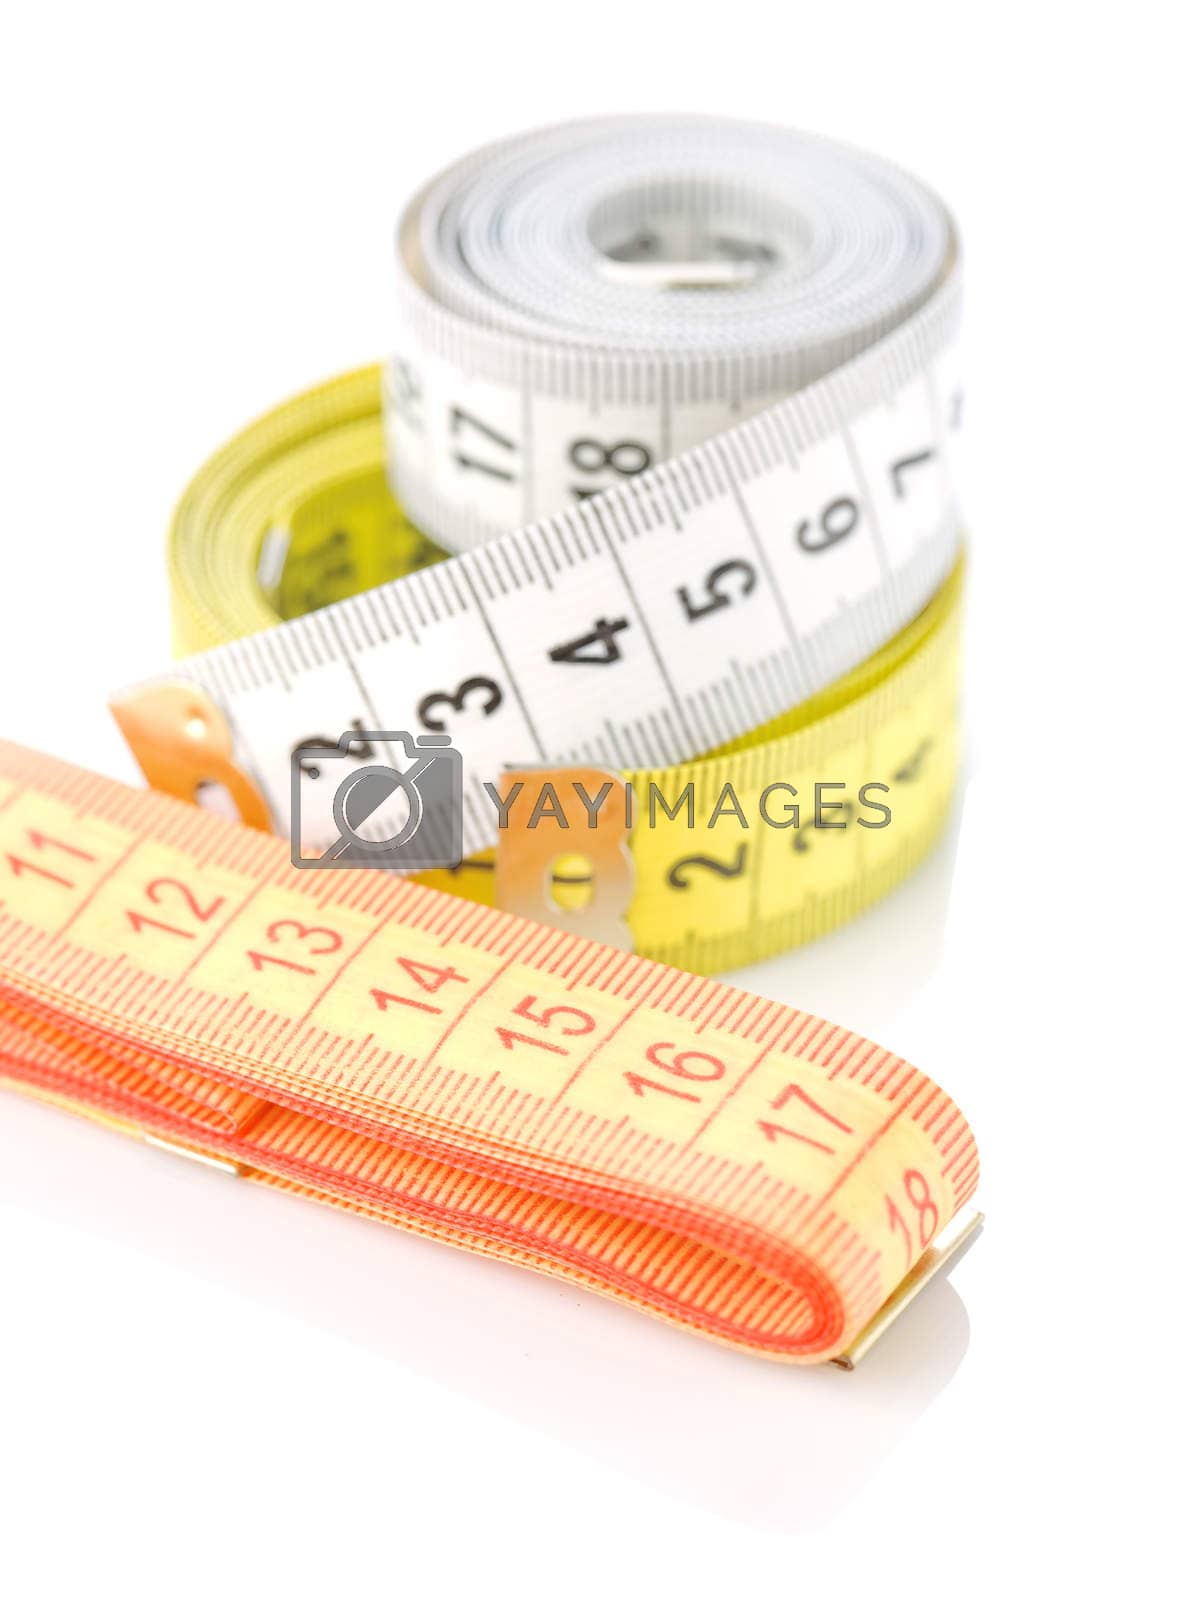 Royalty free image of measuring tapes by mihalec